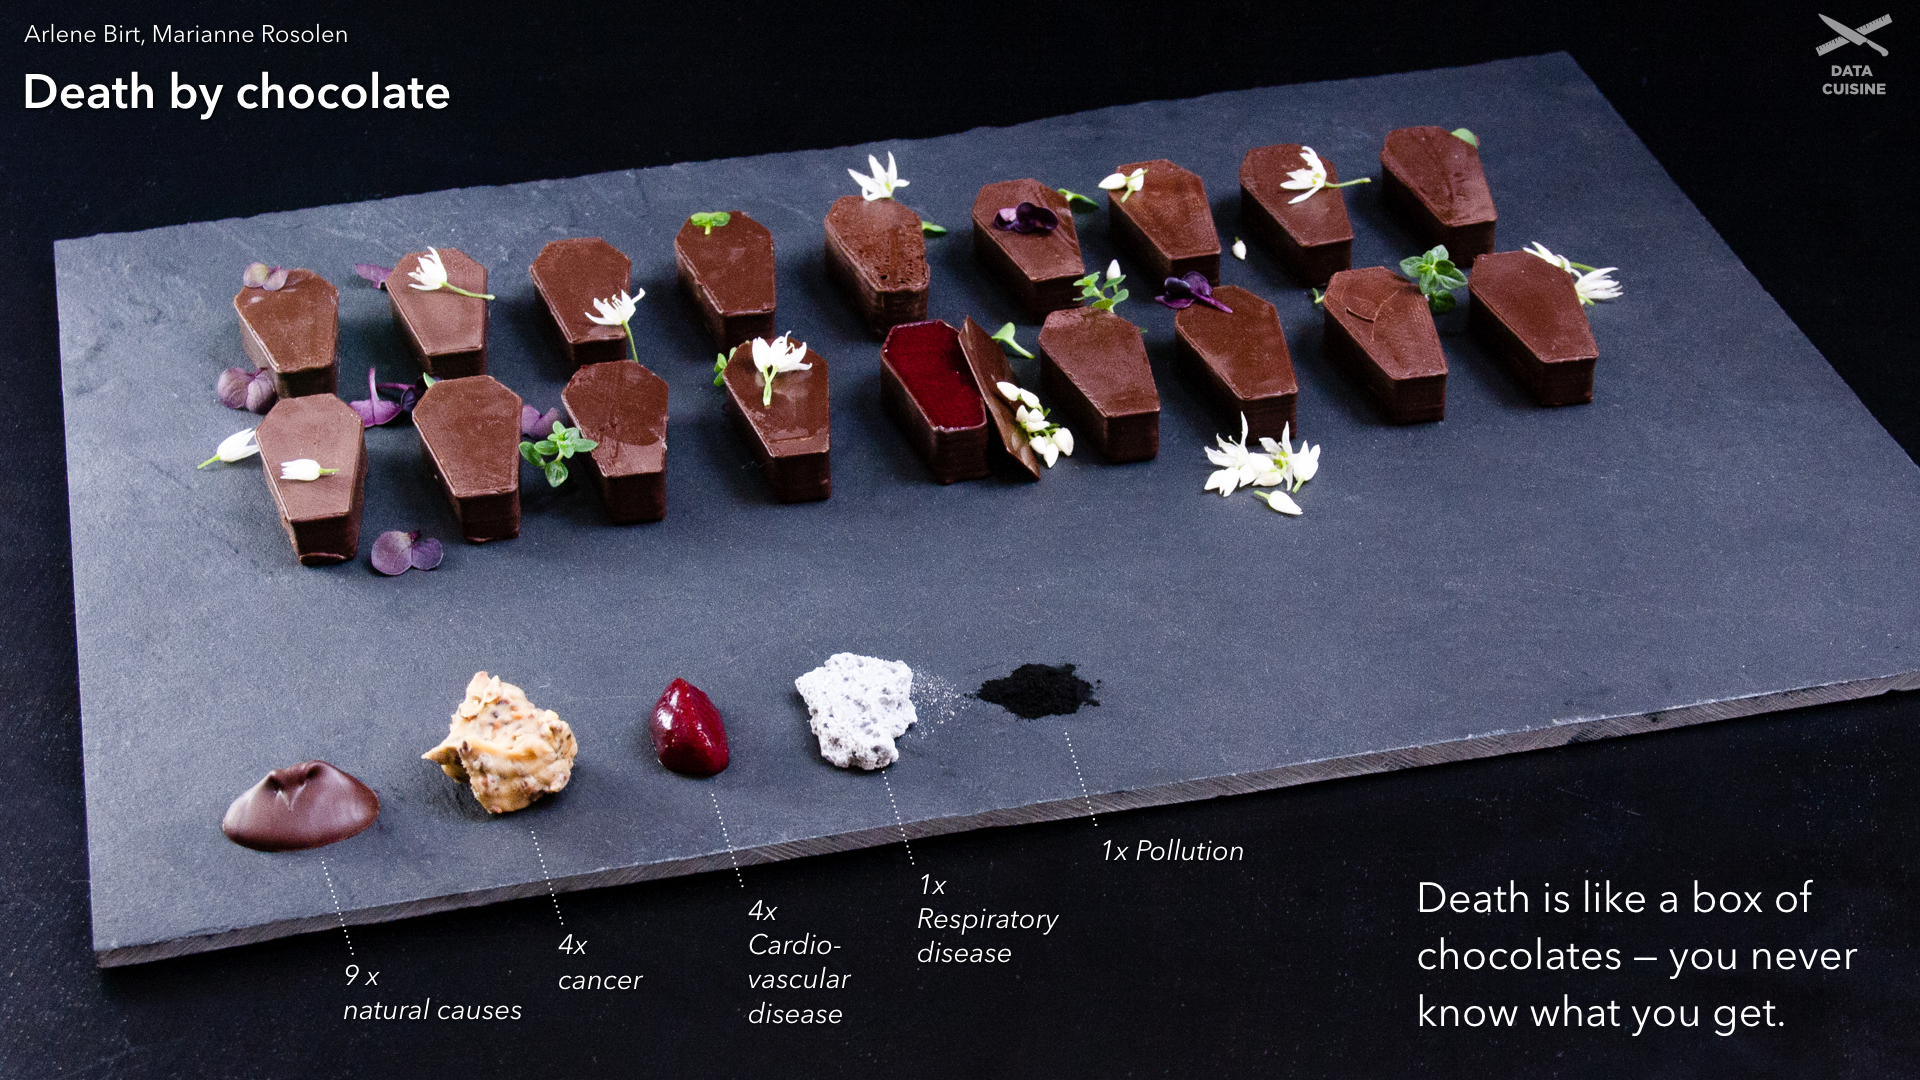 Result of a Data Cuisine workshop called 'Death by chocolate', consisting of little chocolate coffins